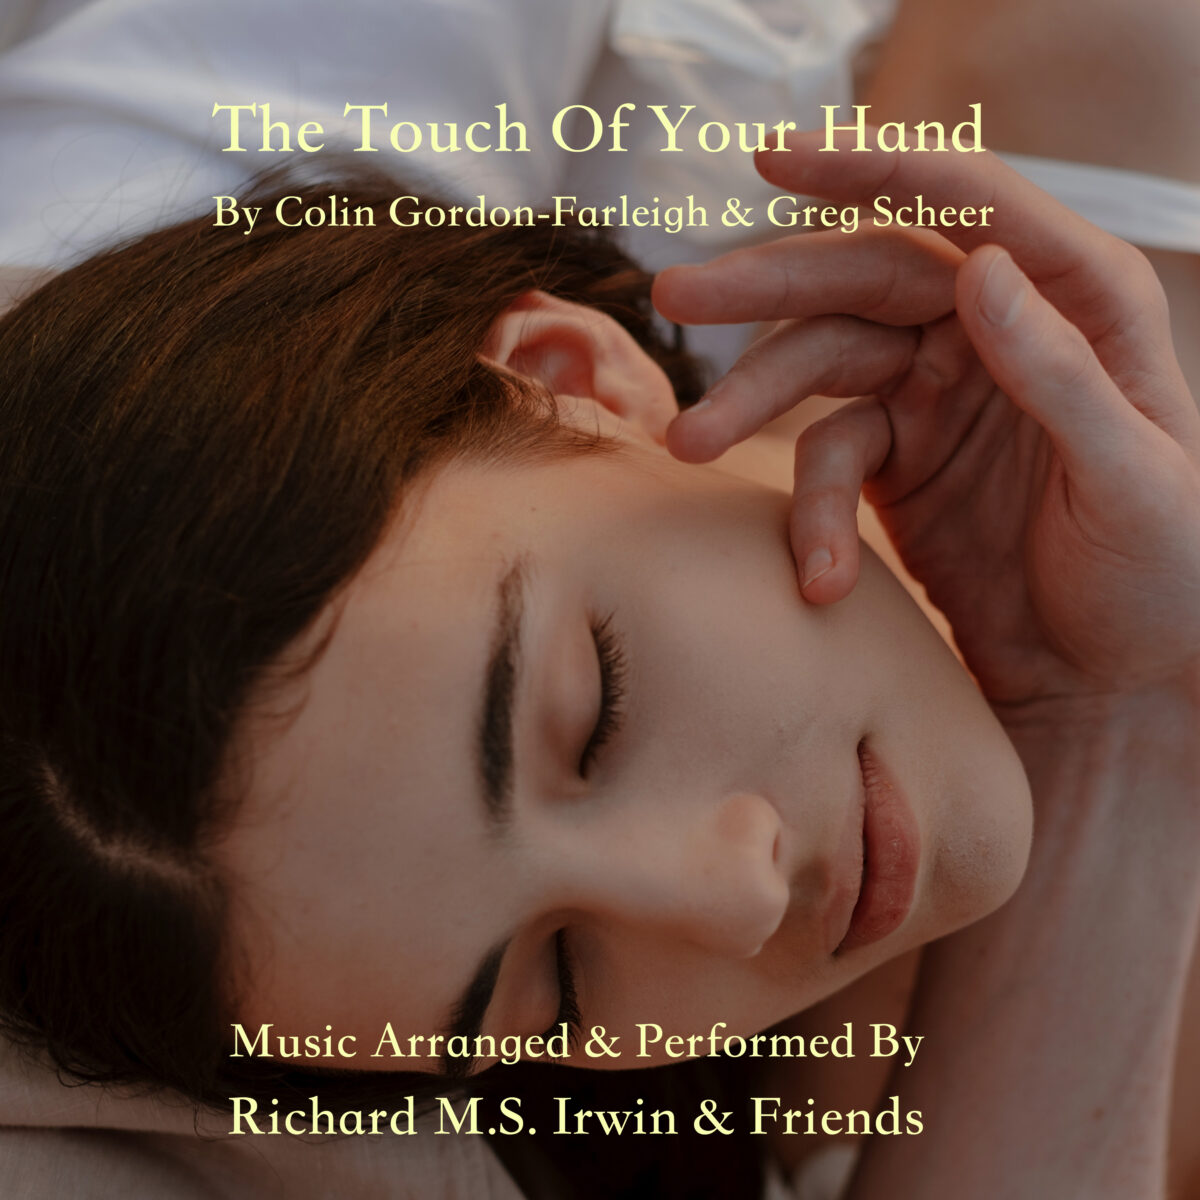 The Touch Of Your Hand